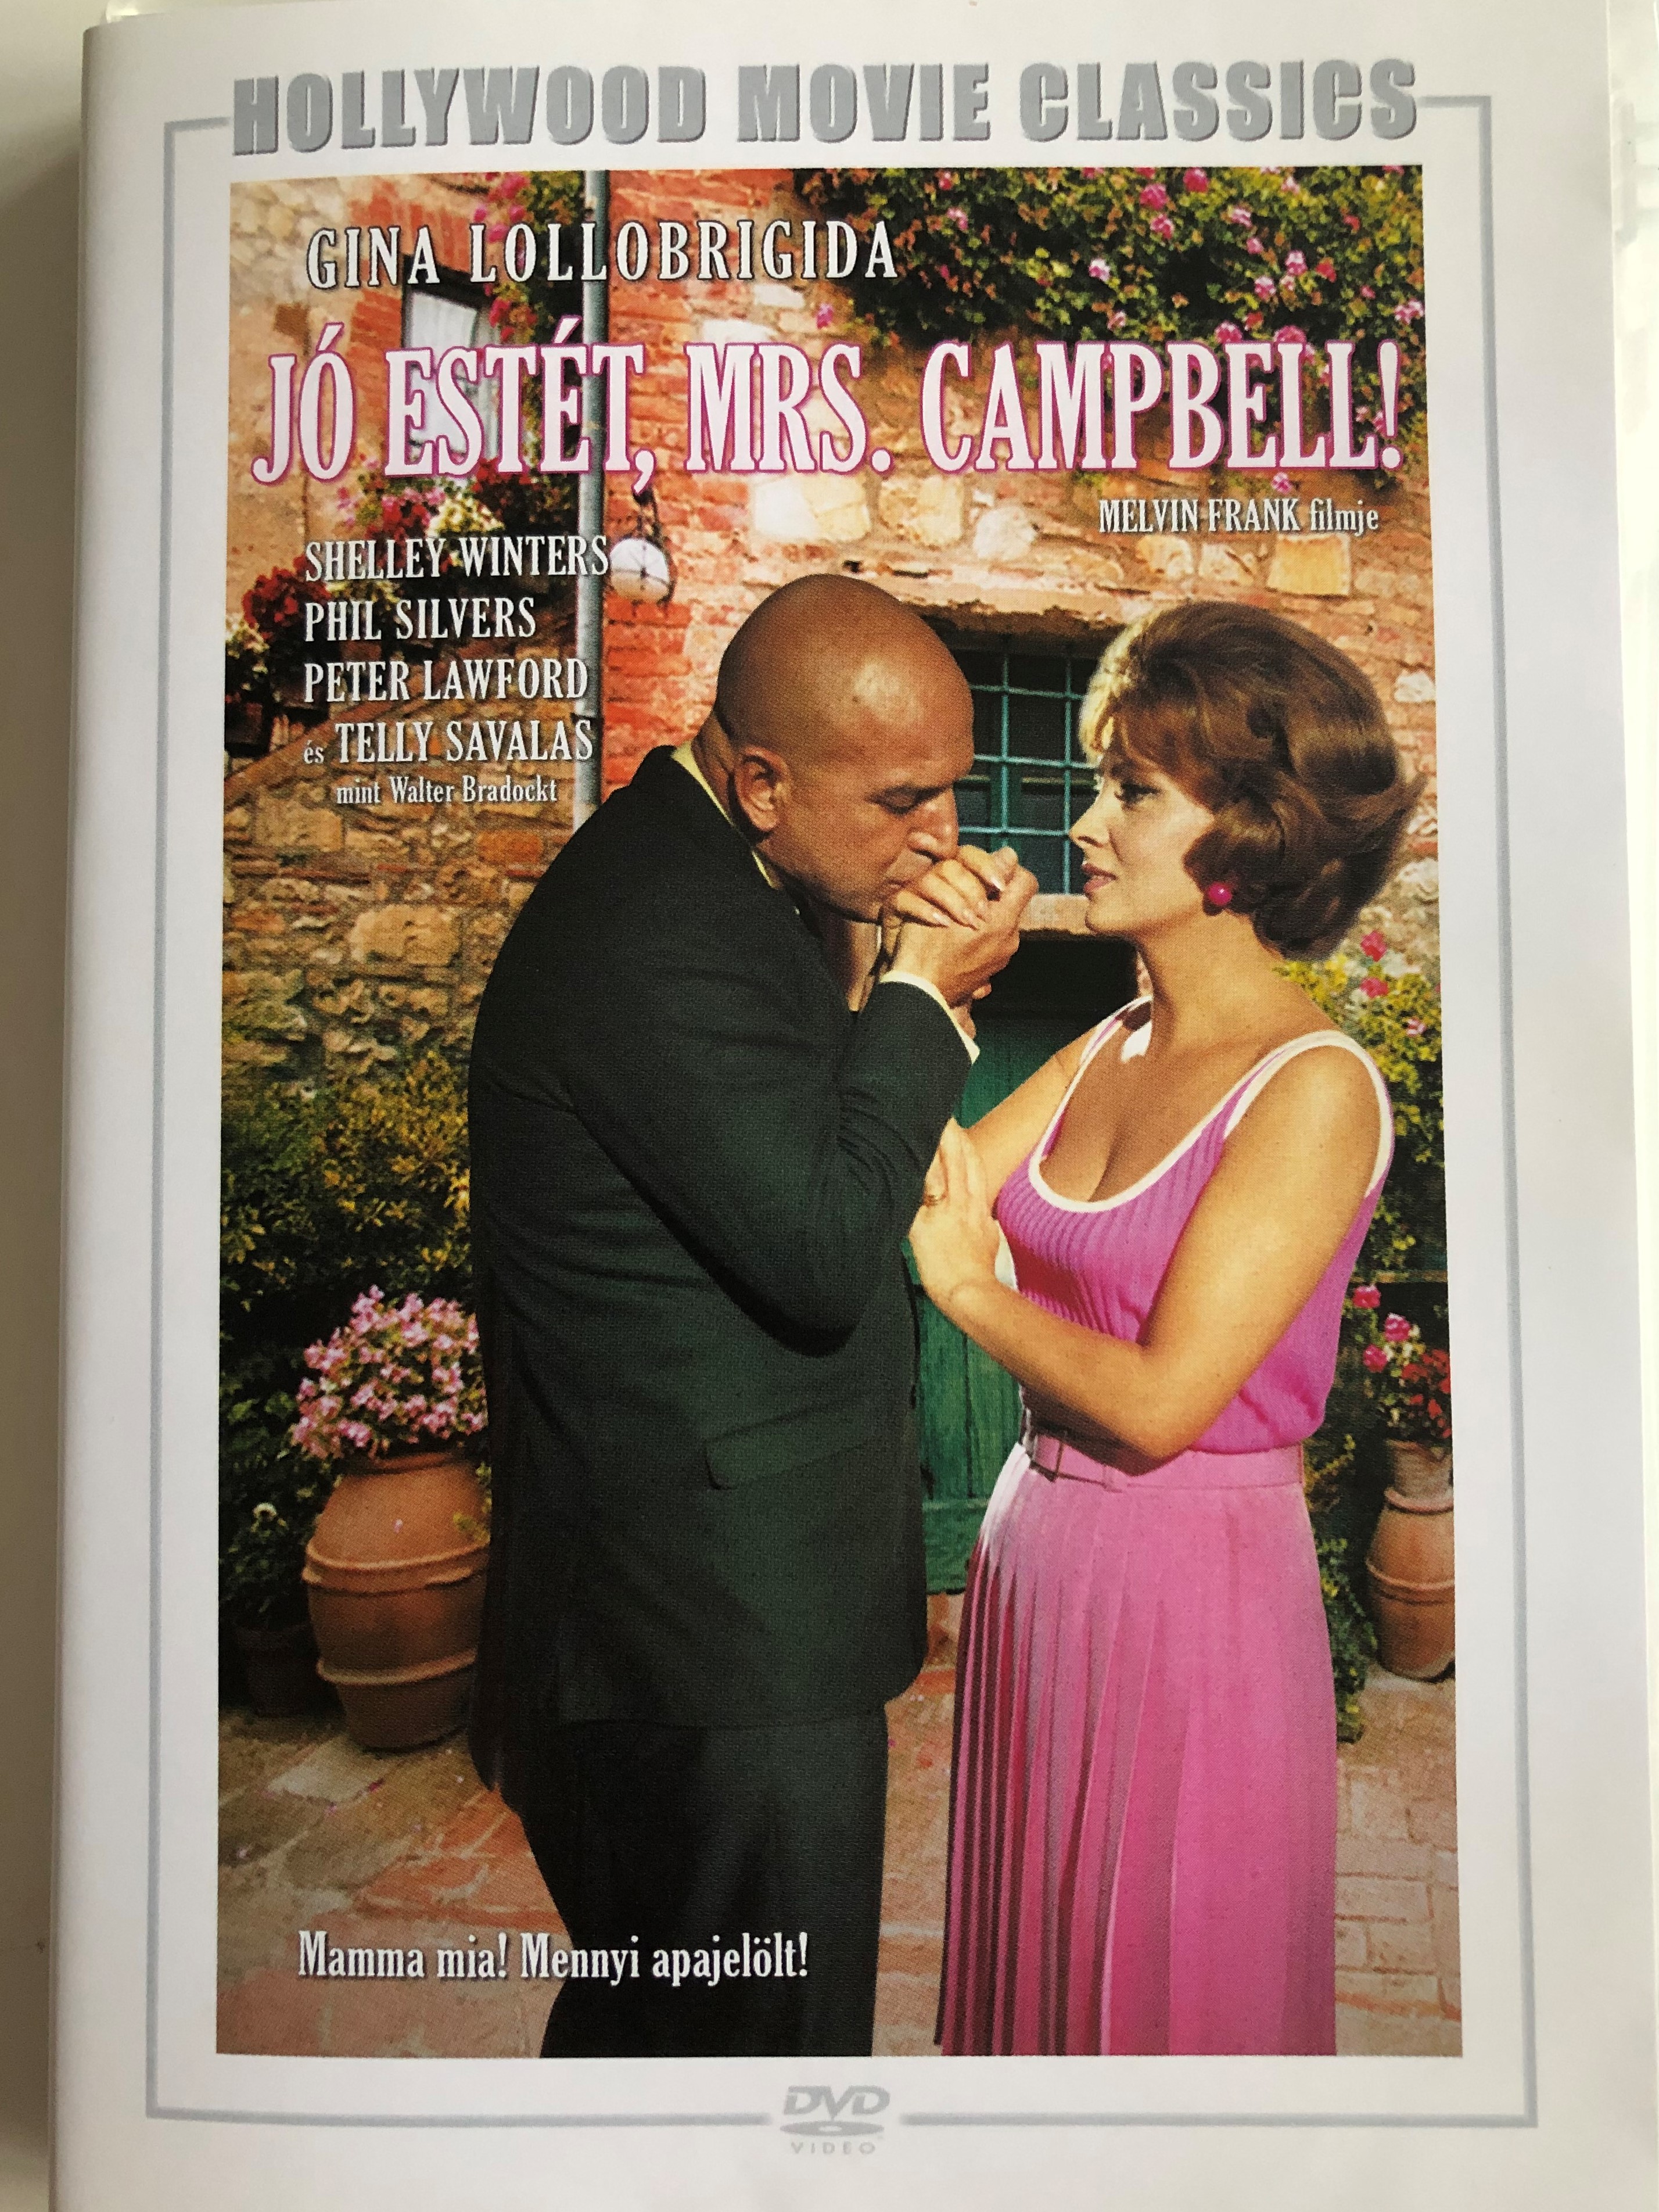 Buona Sera, Mrs. Campbell DVD 1968 Jó estét, Mrs. Campbell! / Directed by  Melvin Frank / Starring: Gina Lollobrigida, Phil Silvers, Peter Lawford,  Telly Savalas - Bible in My Language